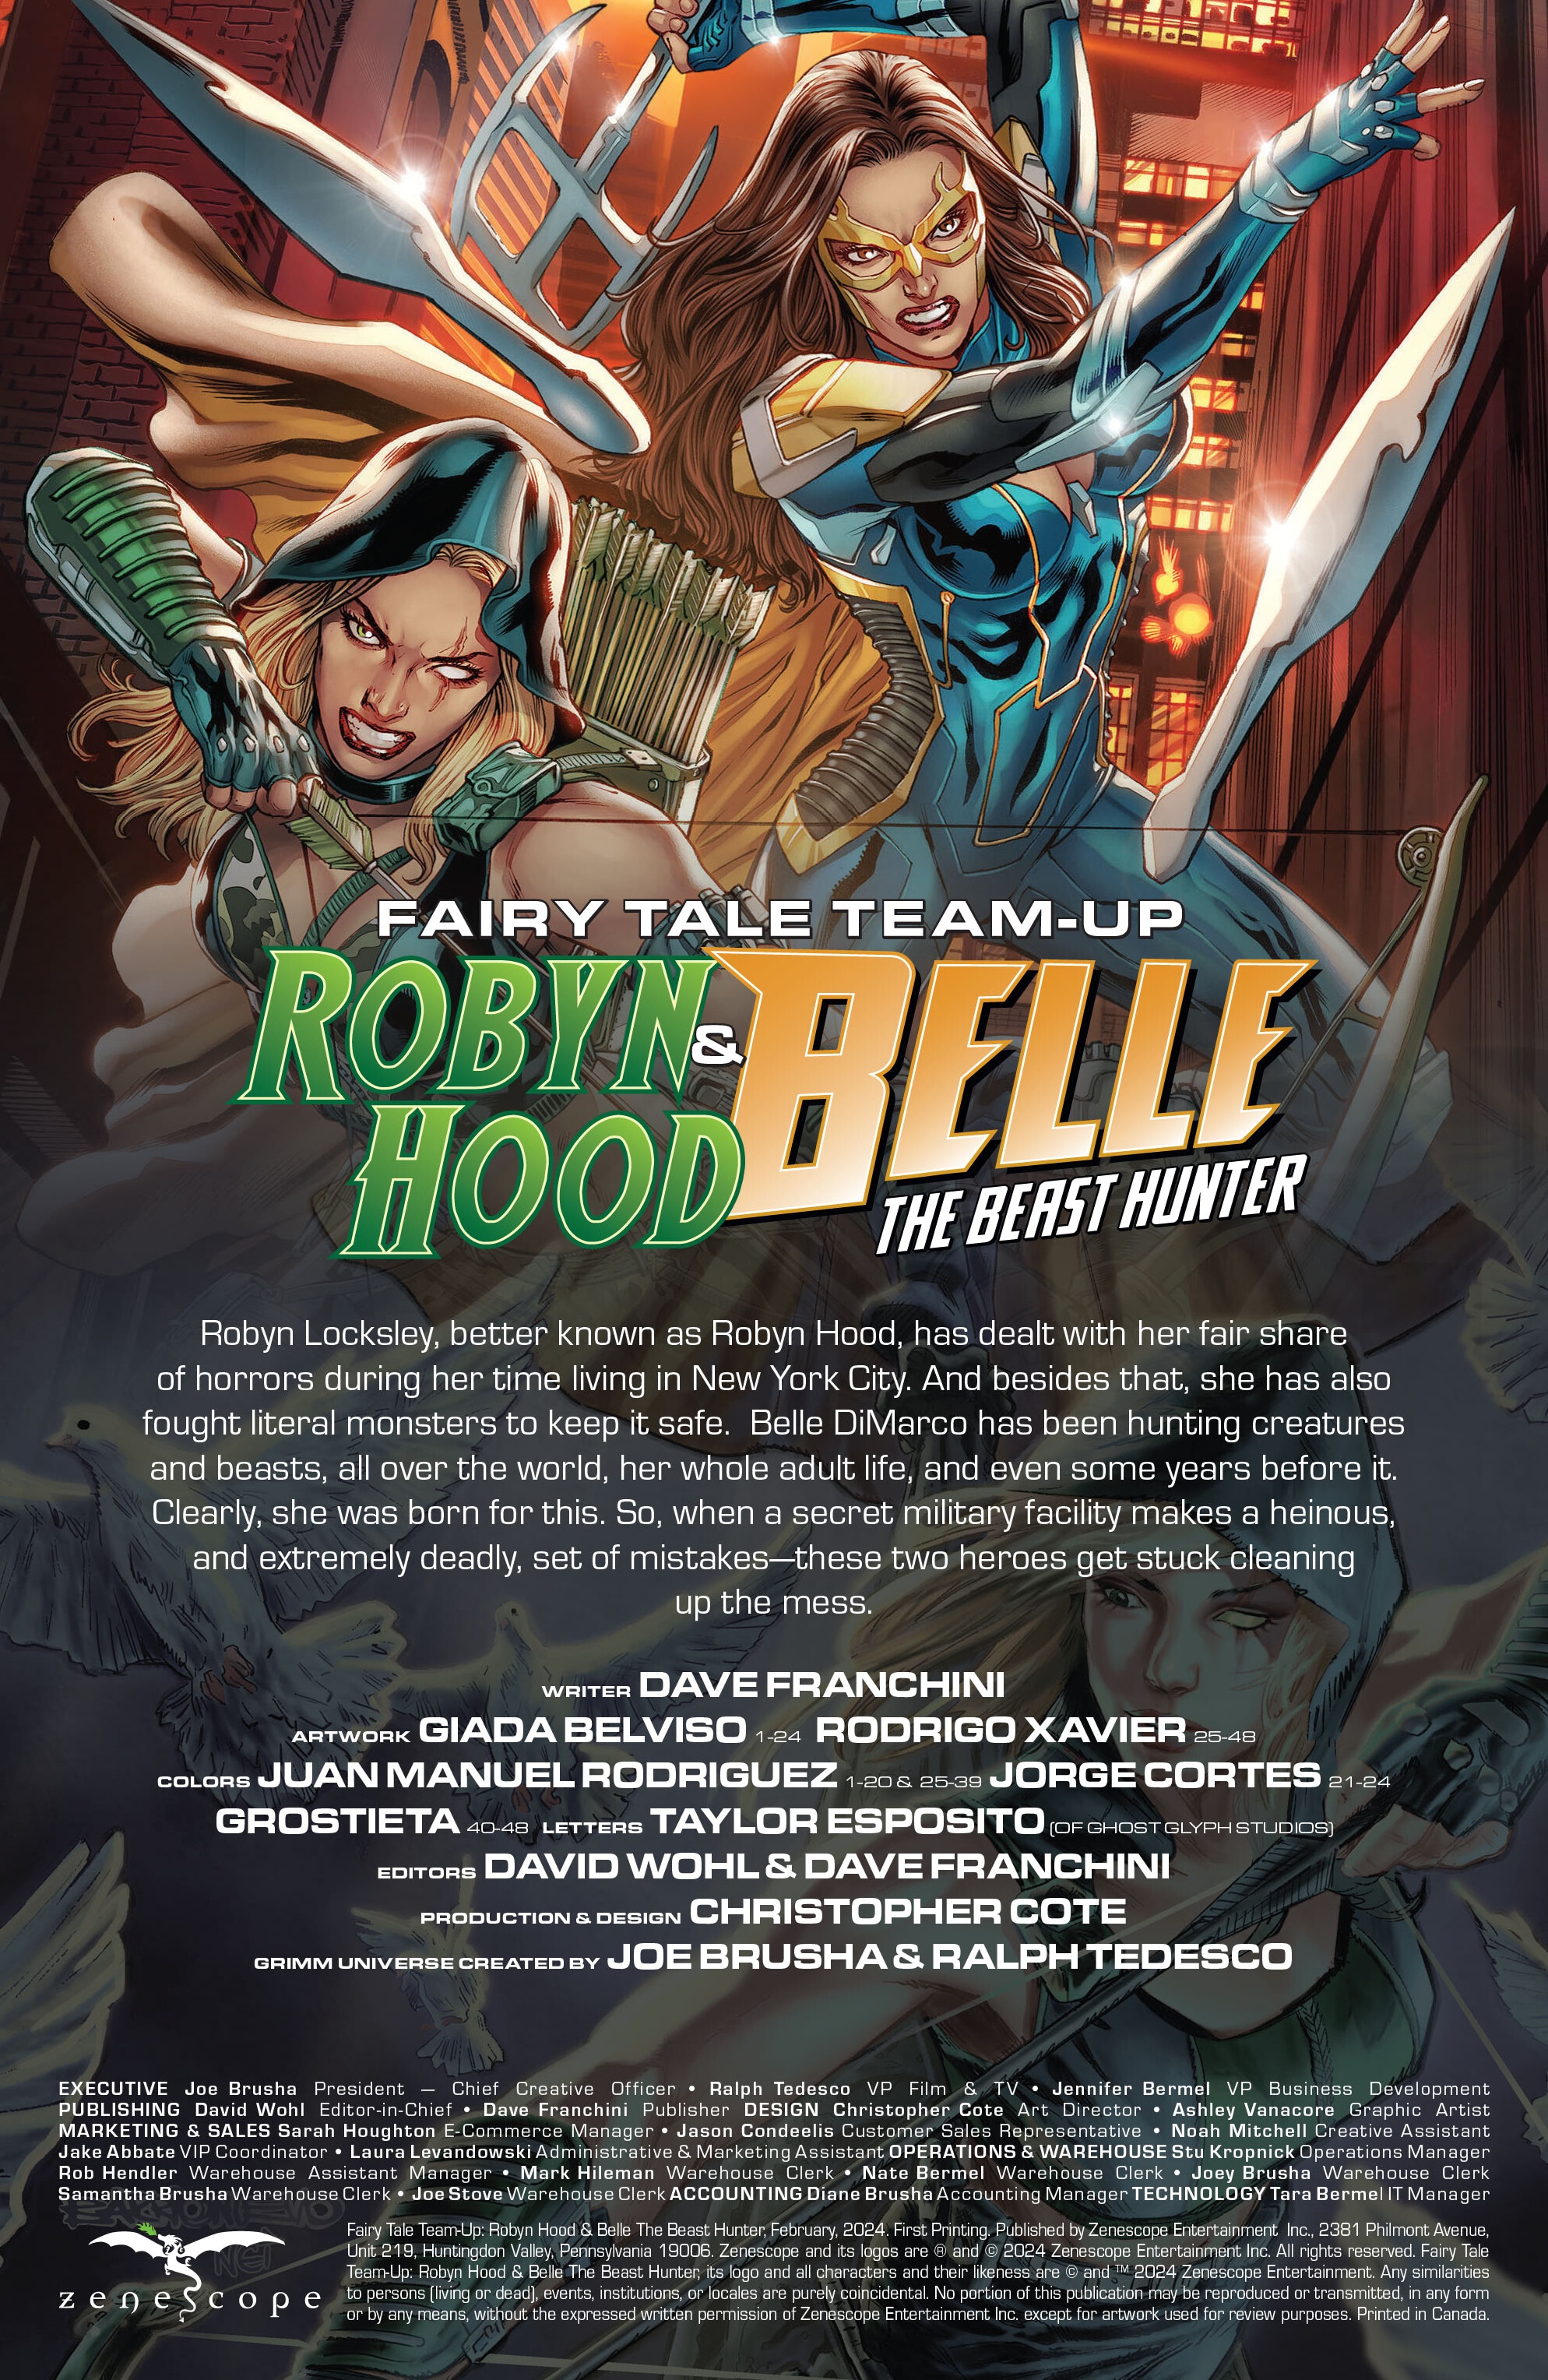 Read online Fairy Tale Team Up: Robyn Hood & Belle comic -  Issue # Full - 2